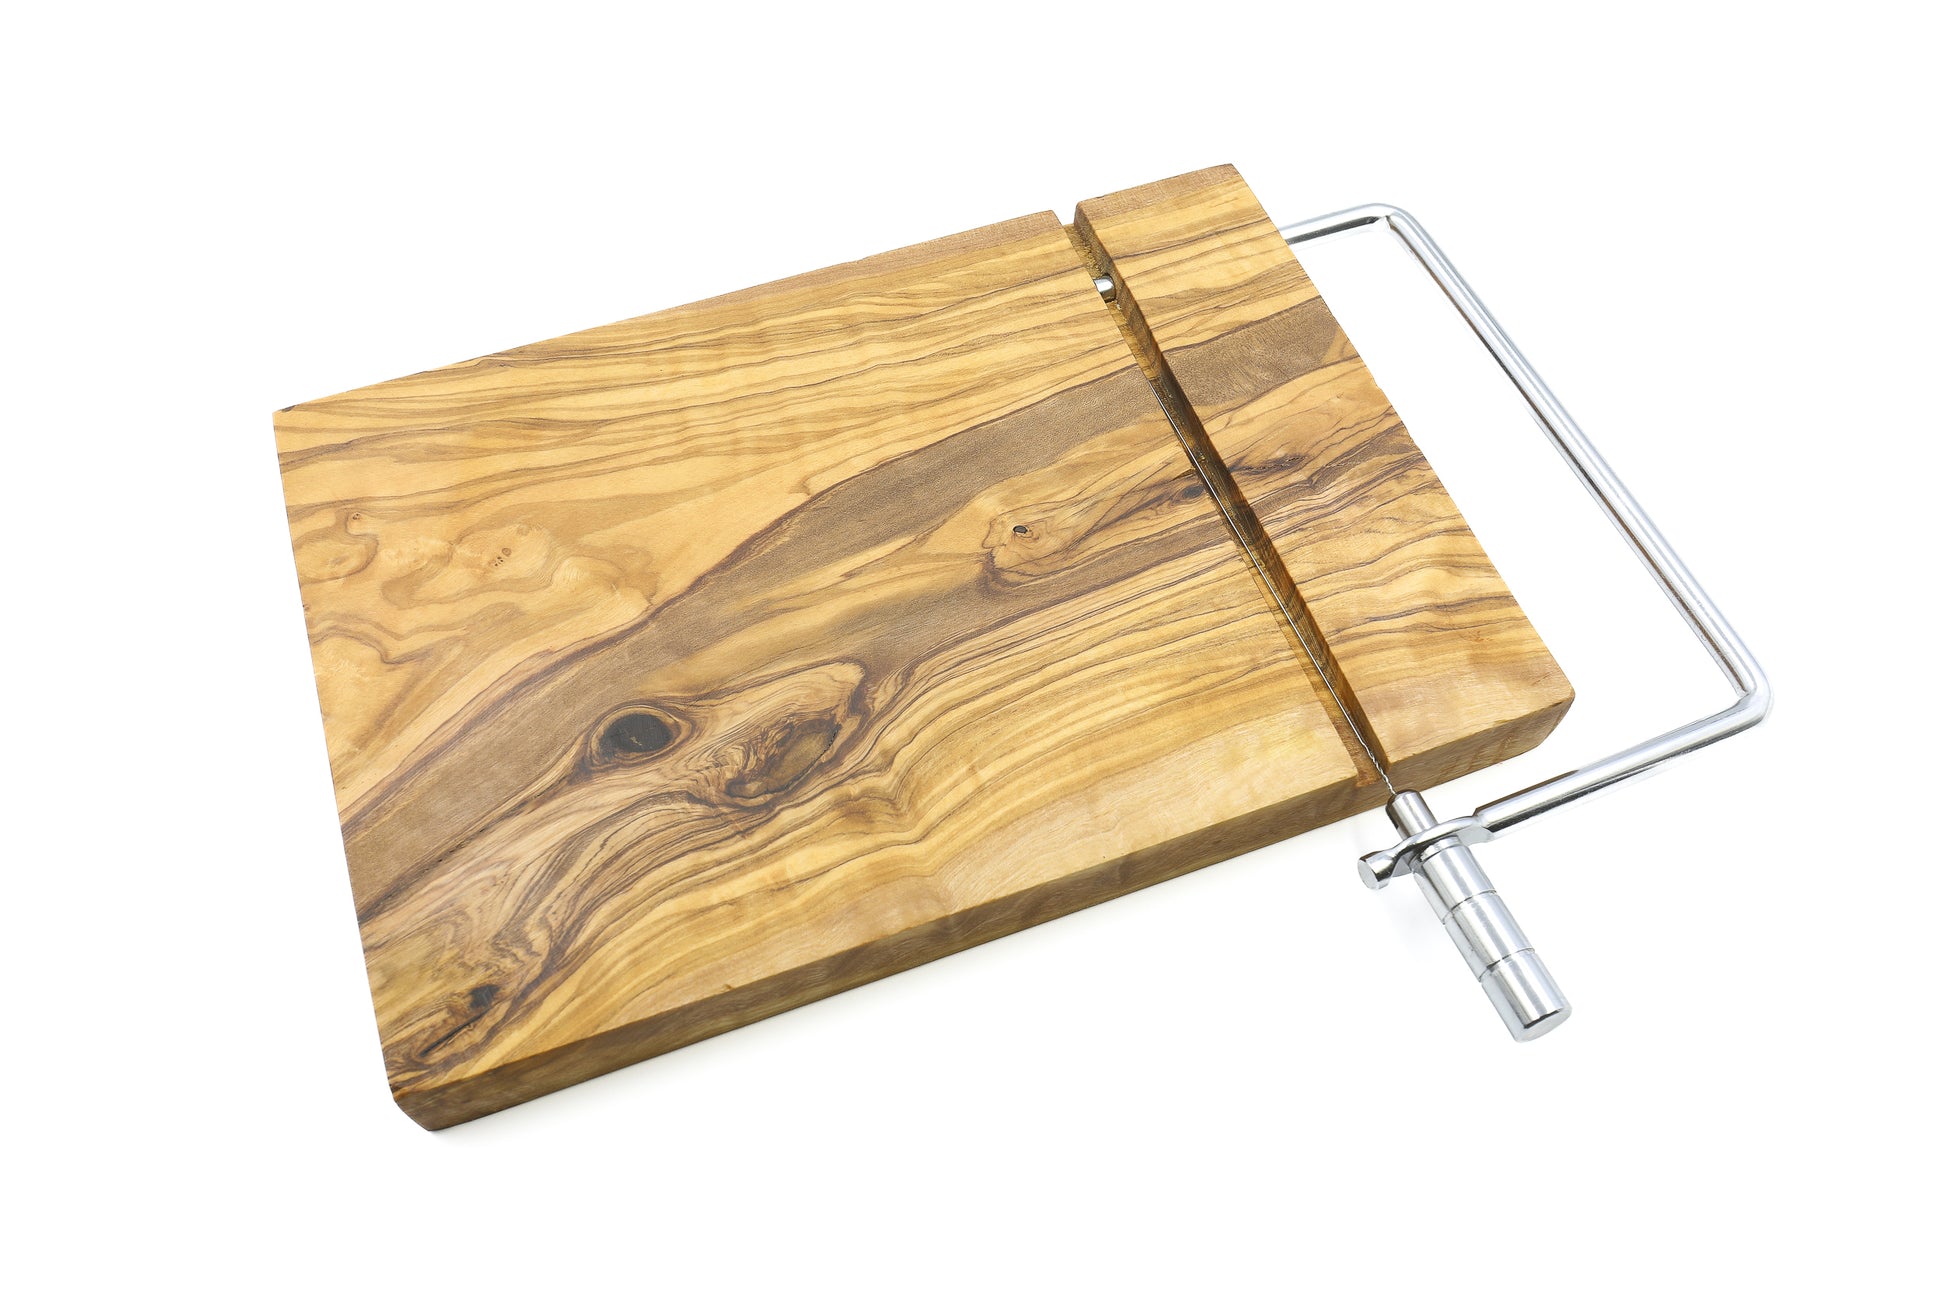 Gourmet cheese slicing ensemble with an exquisite olive wood board